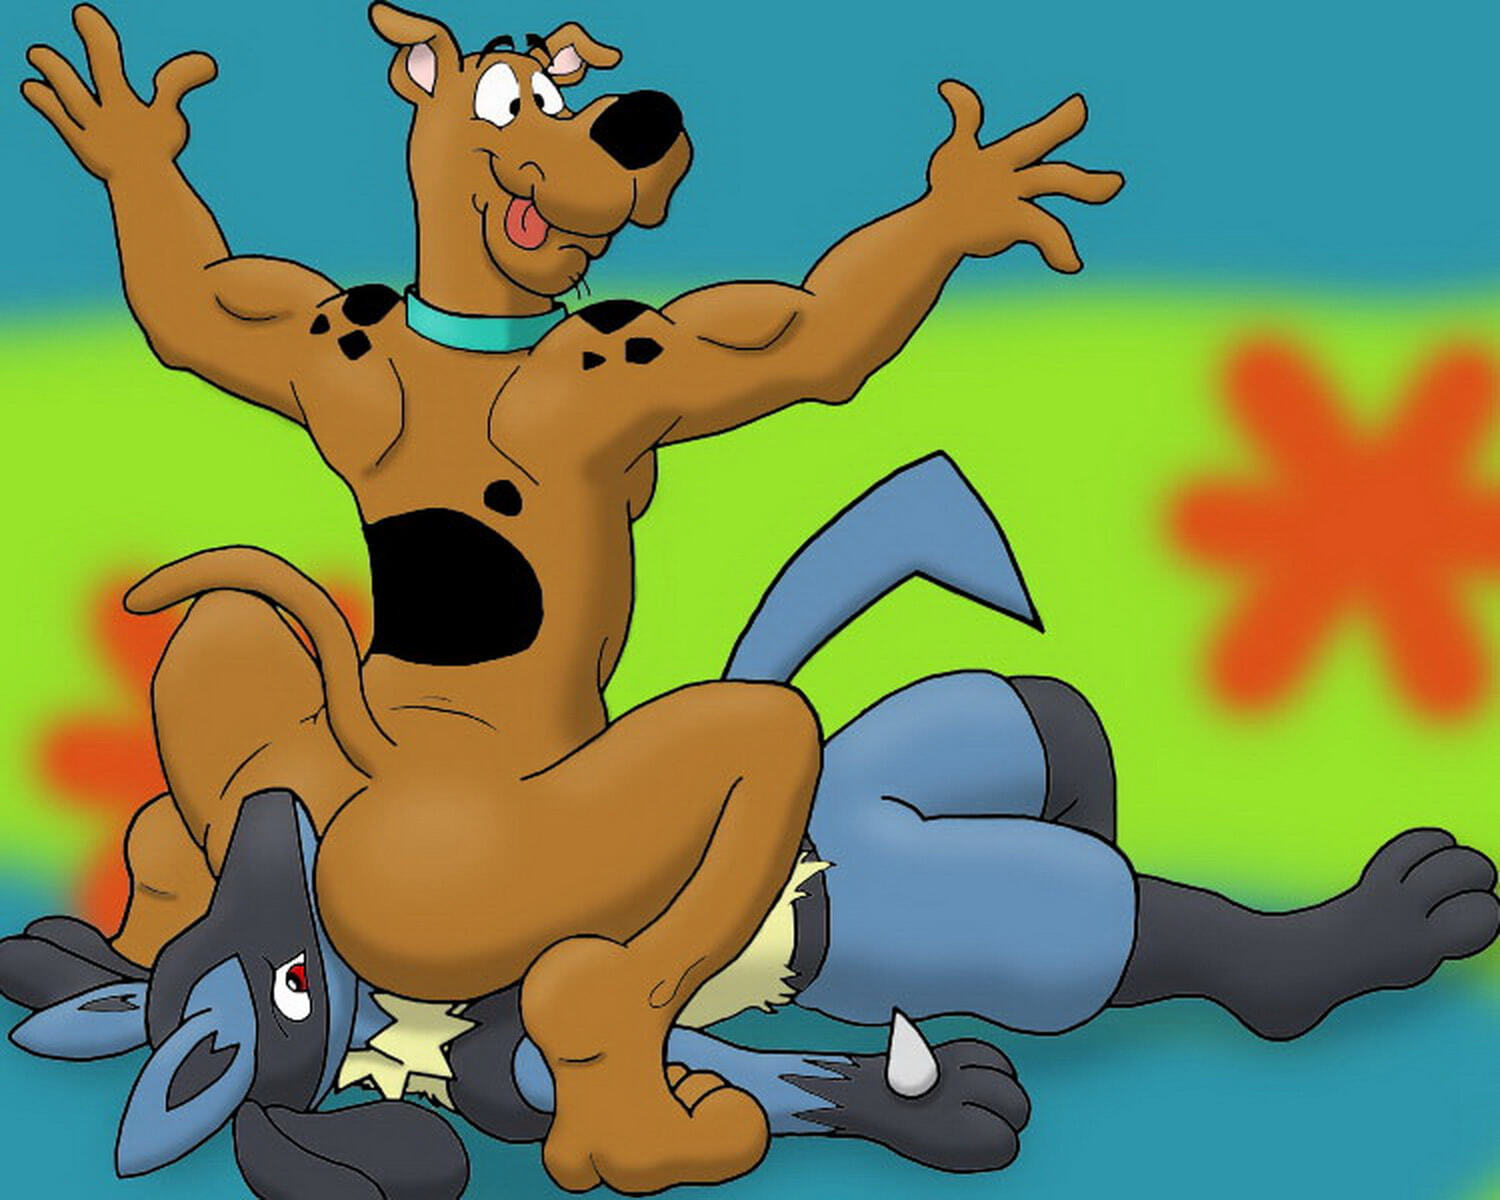 Scooby Gay